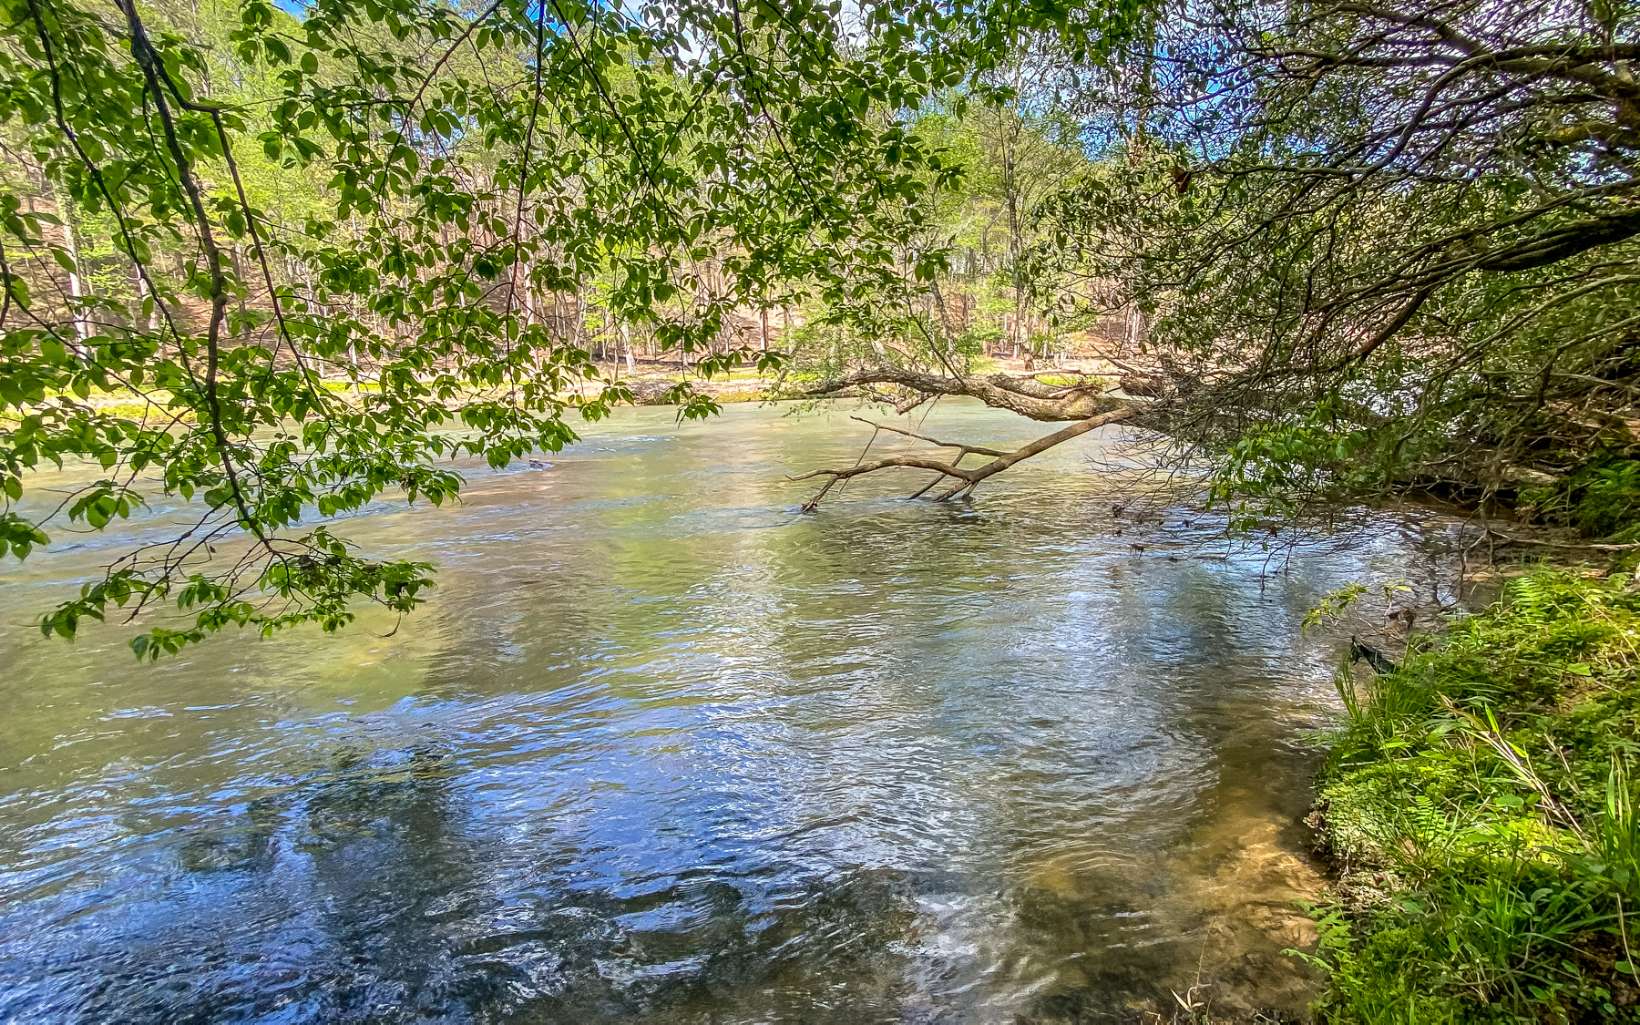 Want to play on your own beach? Tube/kayak to your front door? Listen to the lullaby of the river? Enjoy all the amenities & so much more? Come enjoy this oasis in the mountains. One of a kind perked lot with over 400 feet frontage on the beautiful Coosawattee River. Purchaser will need to apply for new septic permit with set of plans. Previously approved for 3 bedroom. Come visit for a moment & stay for a lifetime! Pools, tennis, game room, exercise room, putt putt golf, canoe launch, walking trails, abundant wildlife. Sale to be 1031 exchange for Seller.